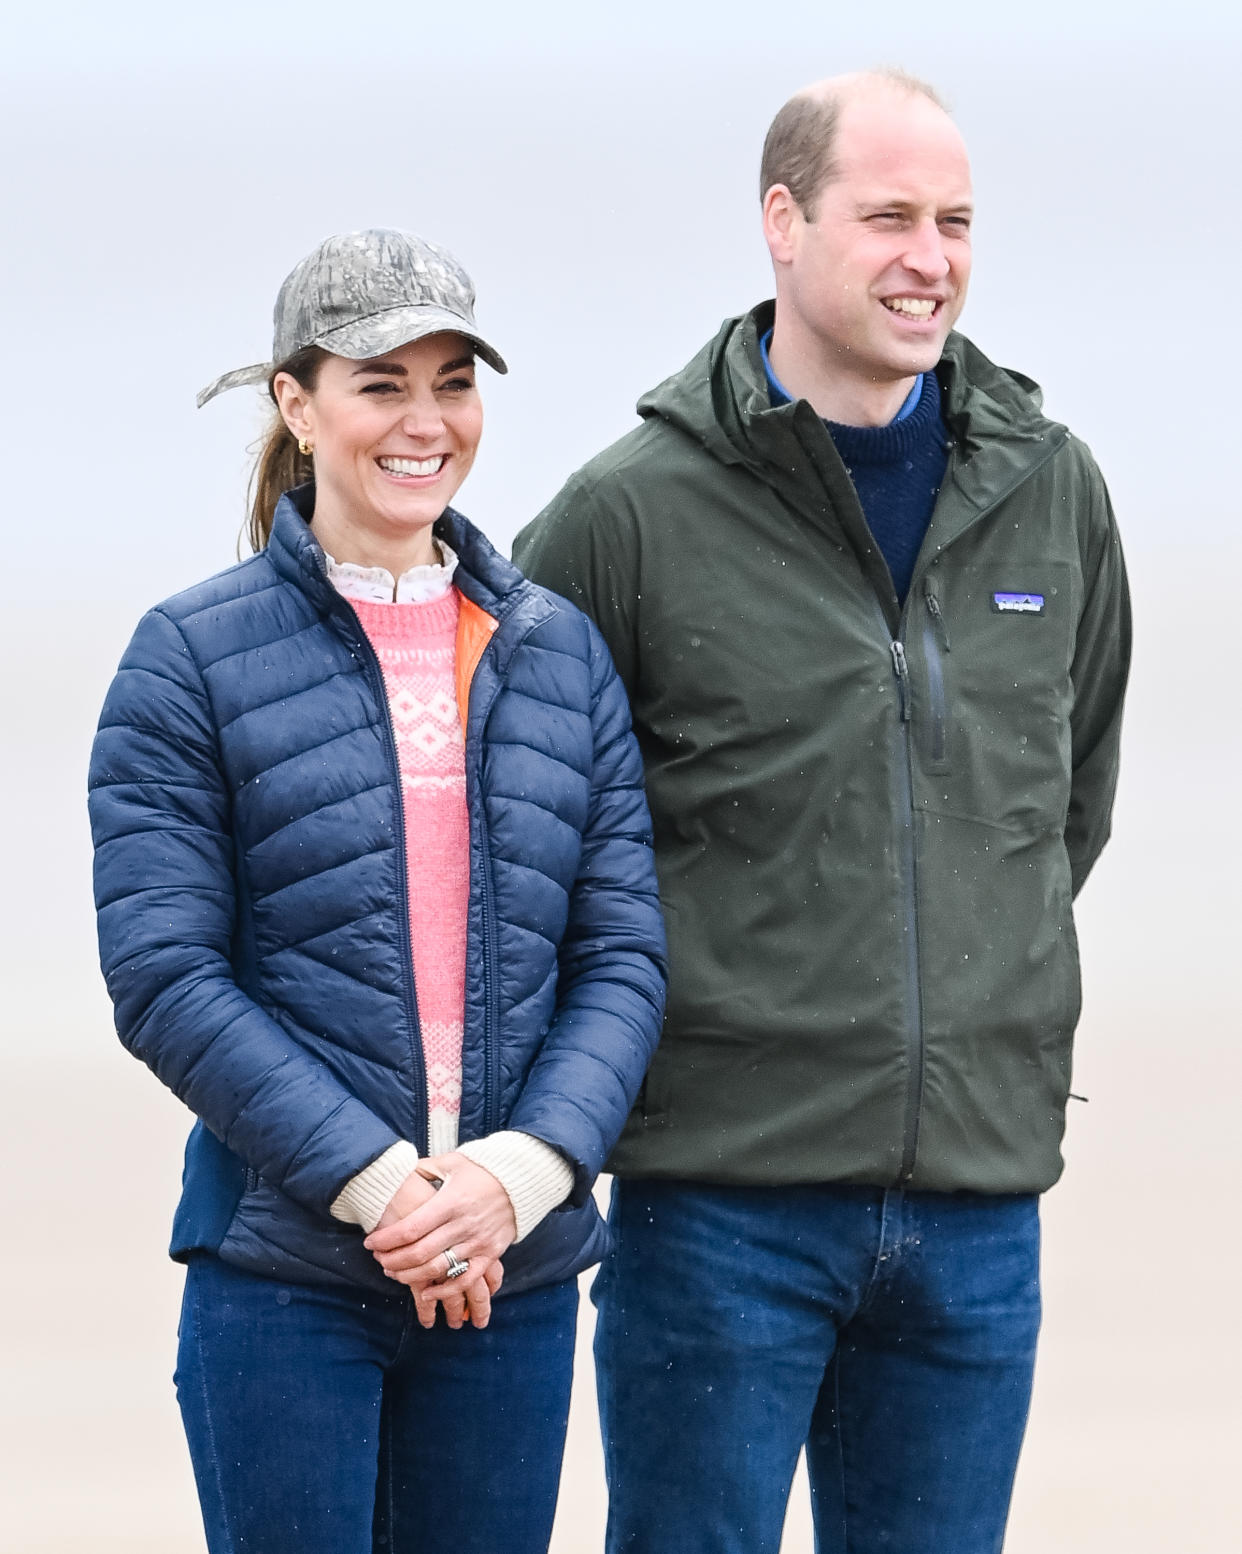 ST ANDREWS, SCOTLAND - MAY 26: Prince William and Catherine Duchess of Cambridge join Fife Young Carers for a session of land yachting on West Sands beach at St Andrews, hosted by local company Blown Away on May 26, 2021 in St Andrews, Scotland. (Photo by Pool/Samir Hussein/WireImage)